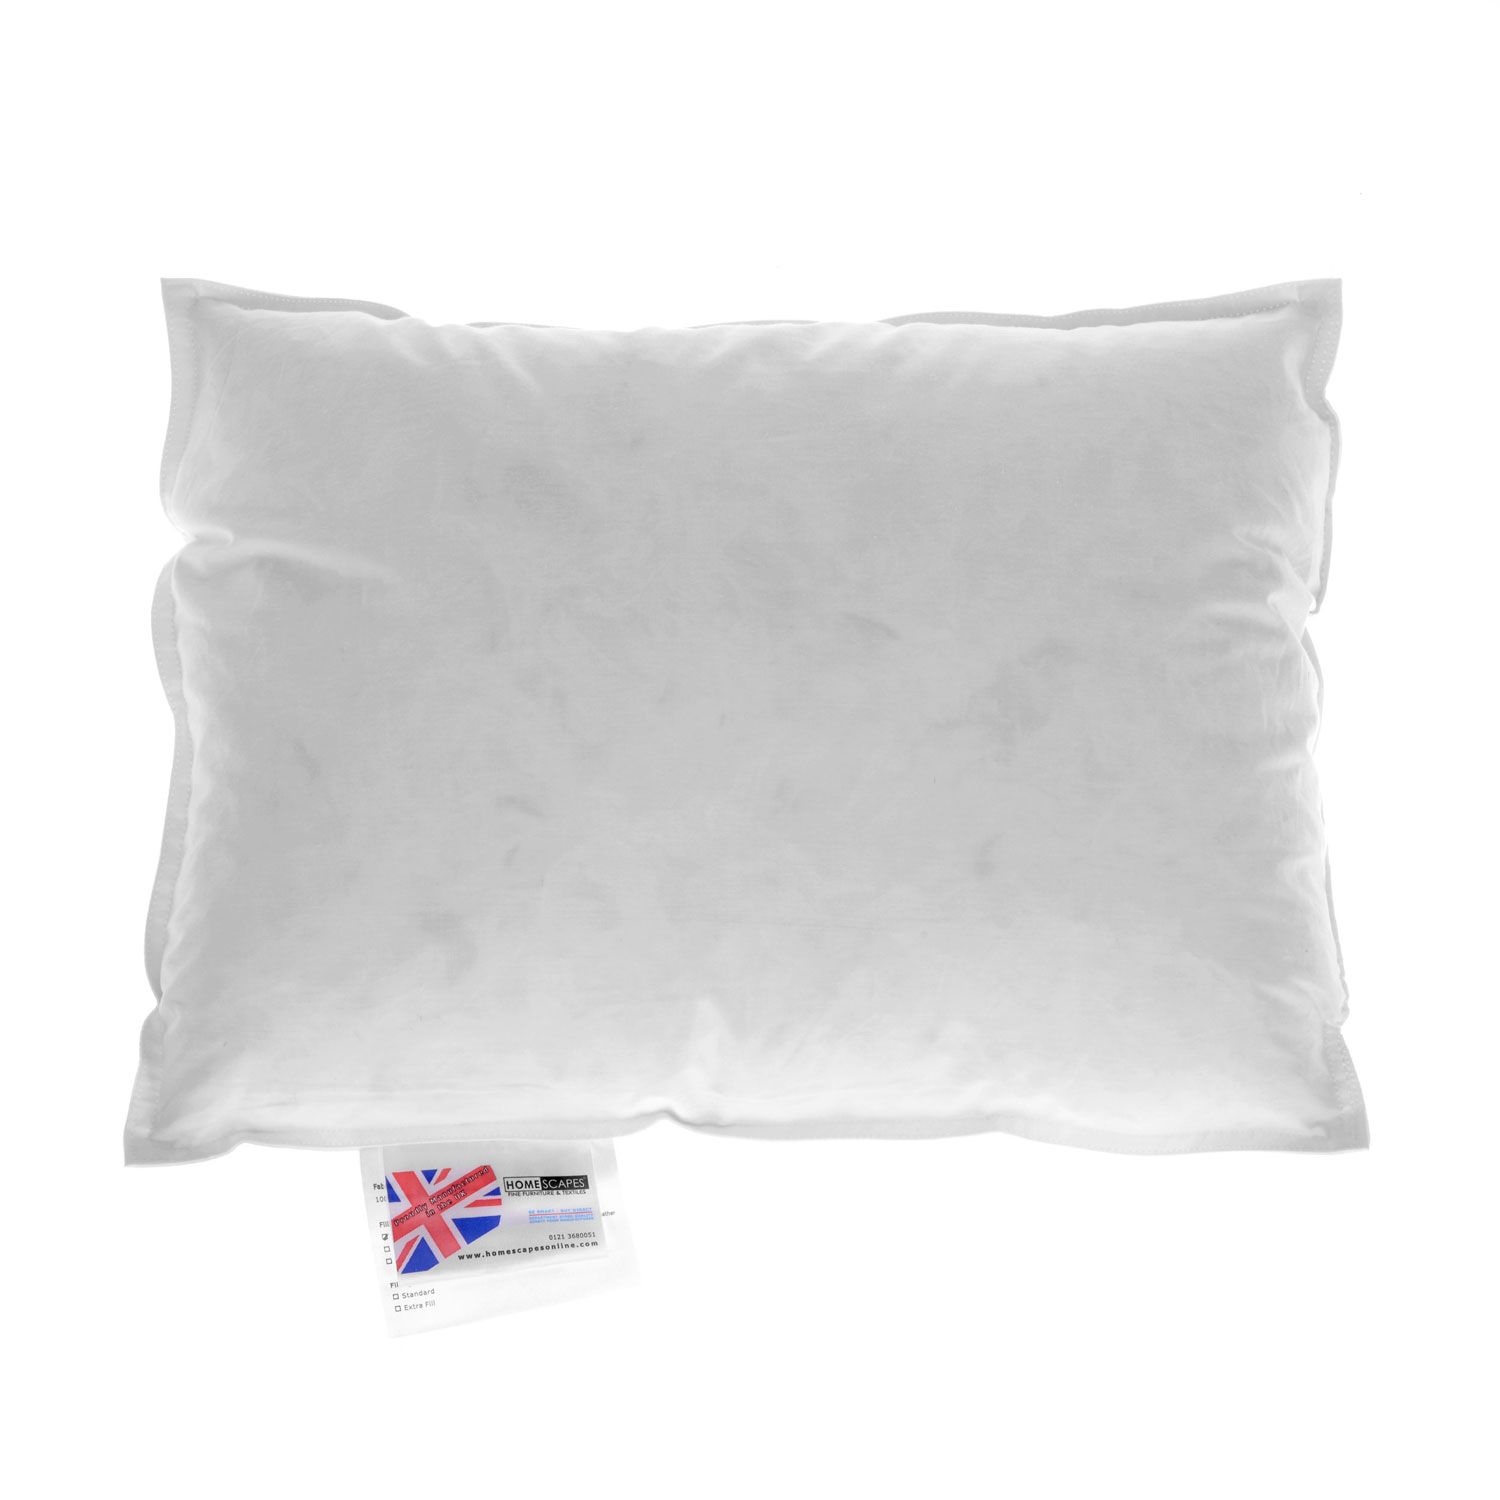 Cushion Inserts 20x20 Inch 50 x 50 cm Inners Fillers Pads Extra Deep Filled Sofa 